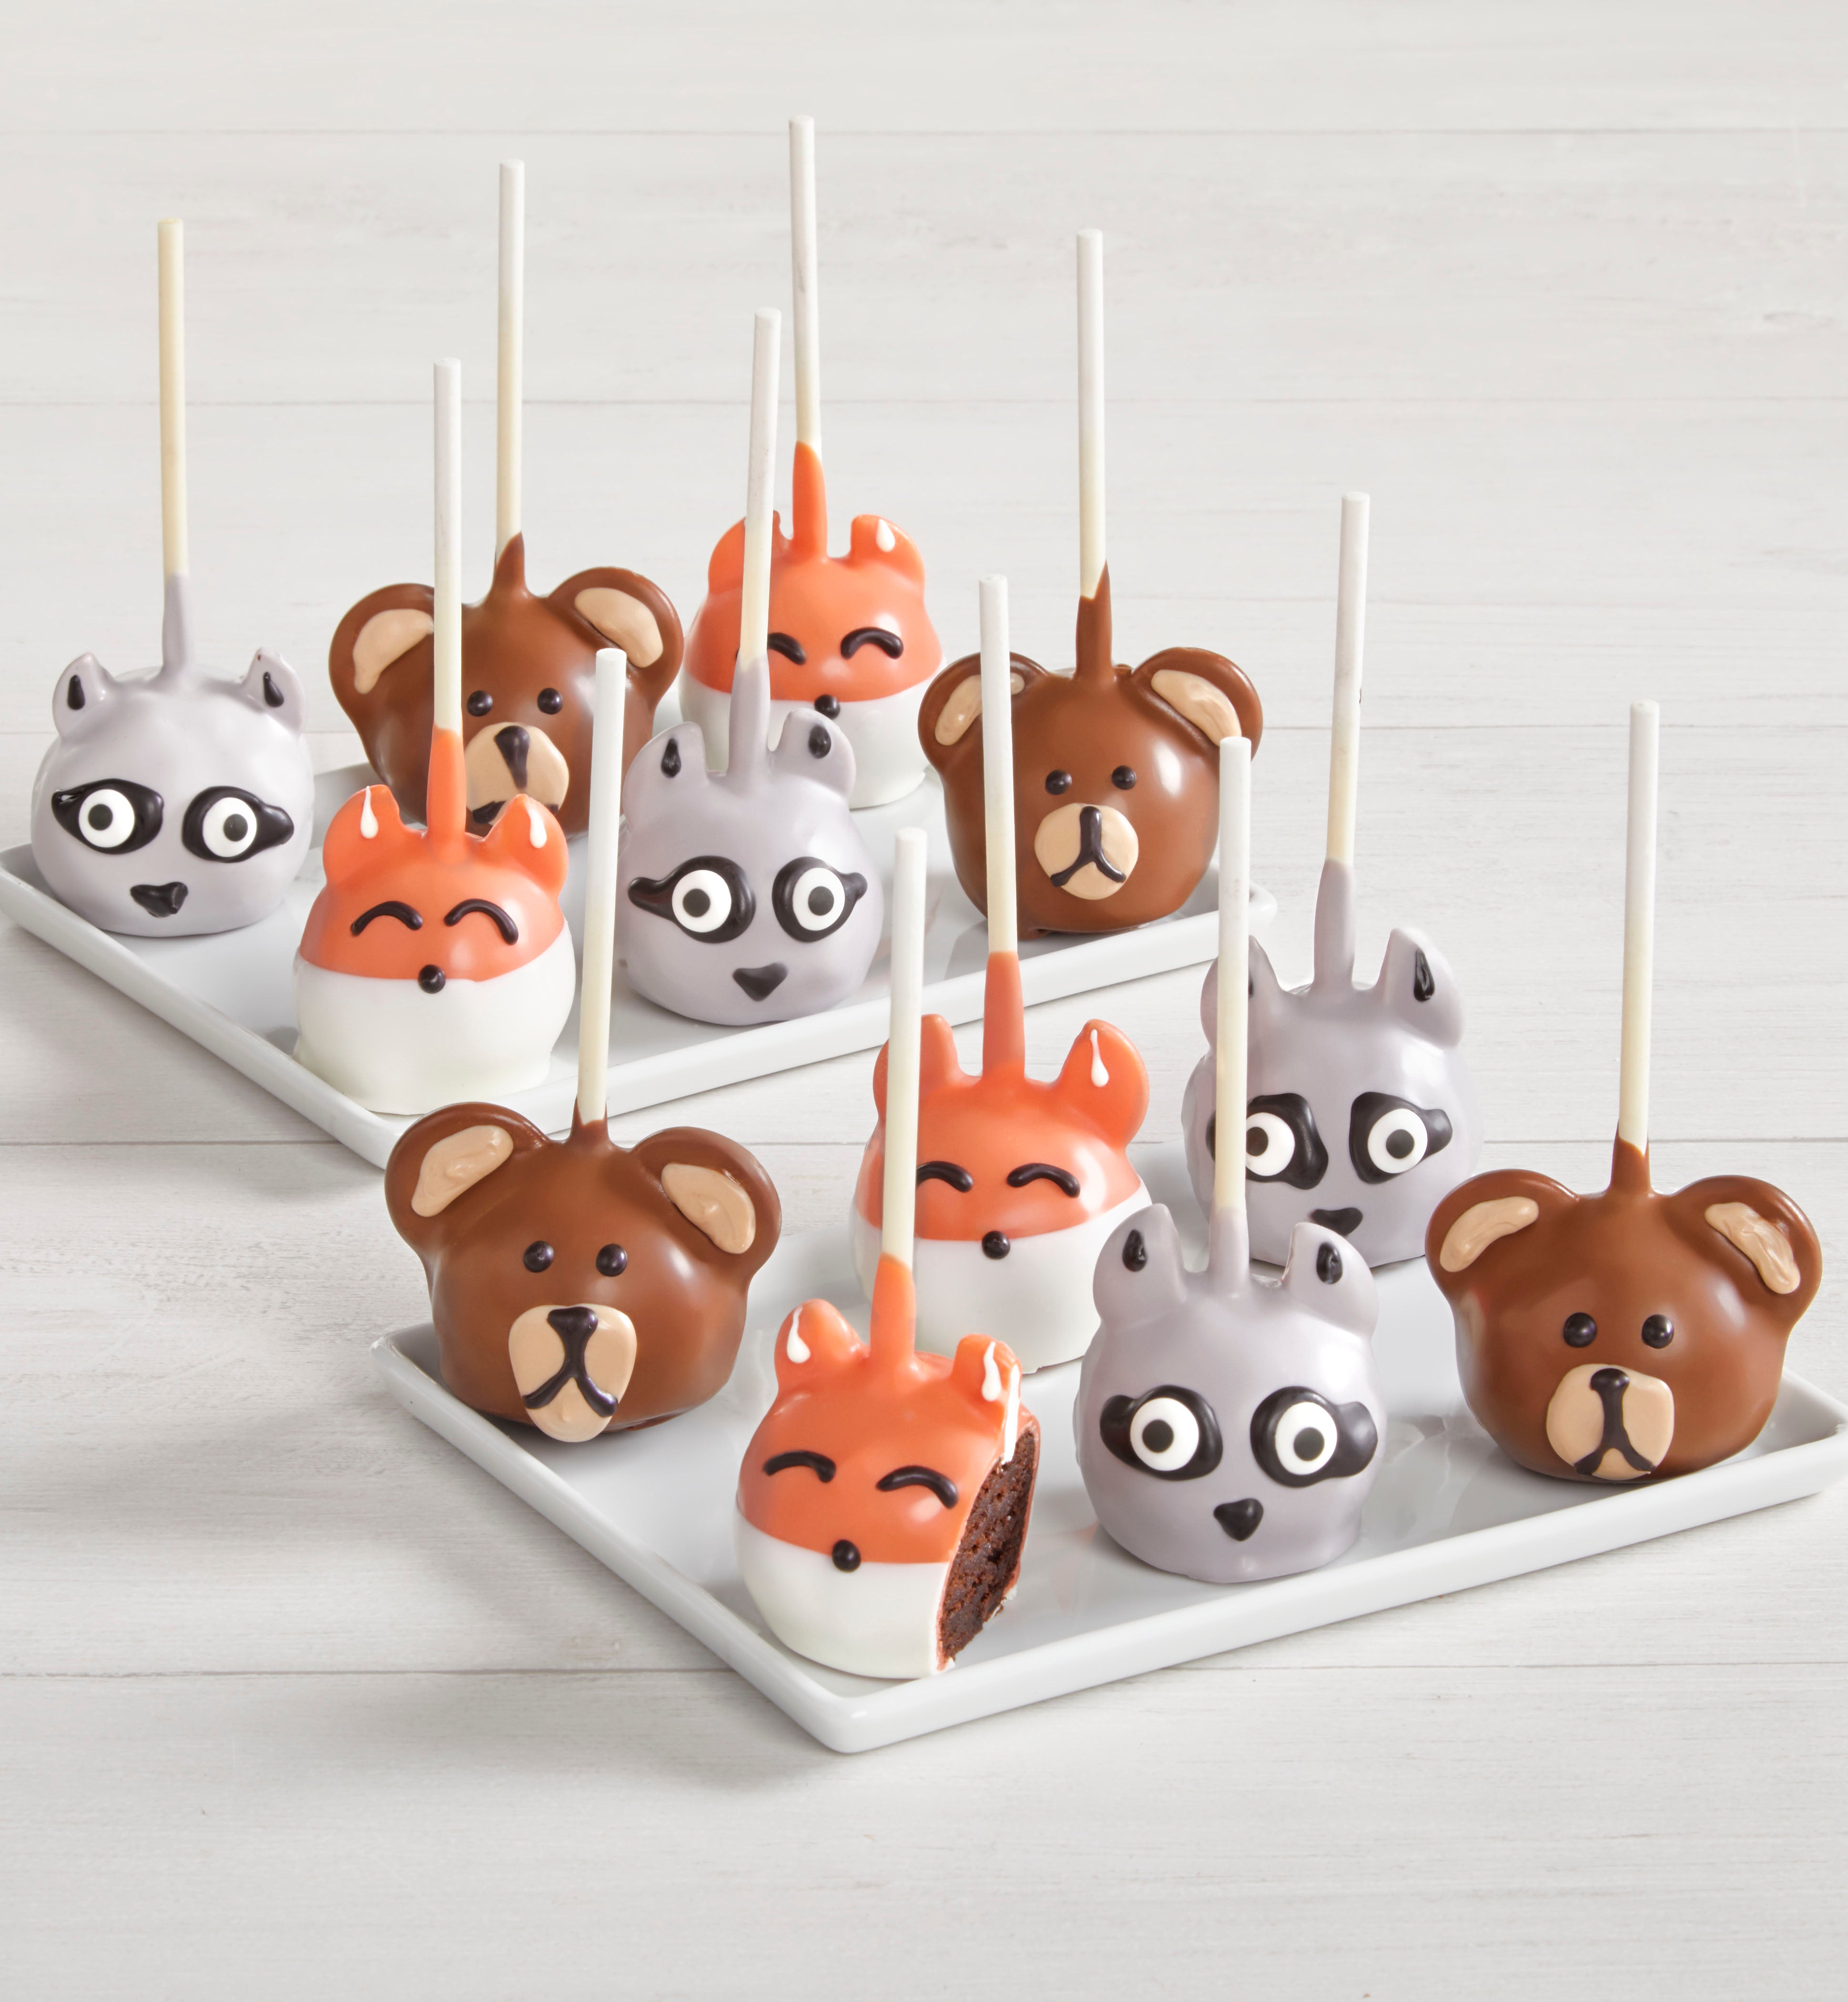 Jungle animals cake pops 🐵🐘🦒🦓🐼🐯 - Sweet Art by Katerina | Facebook